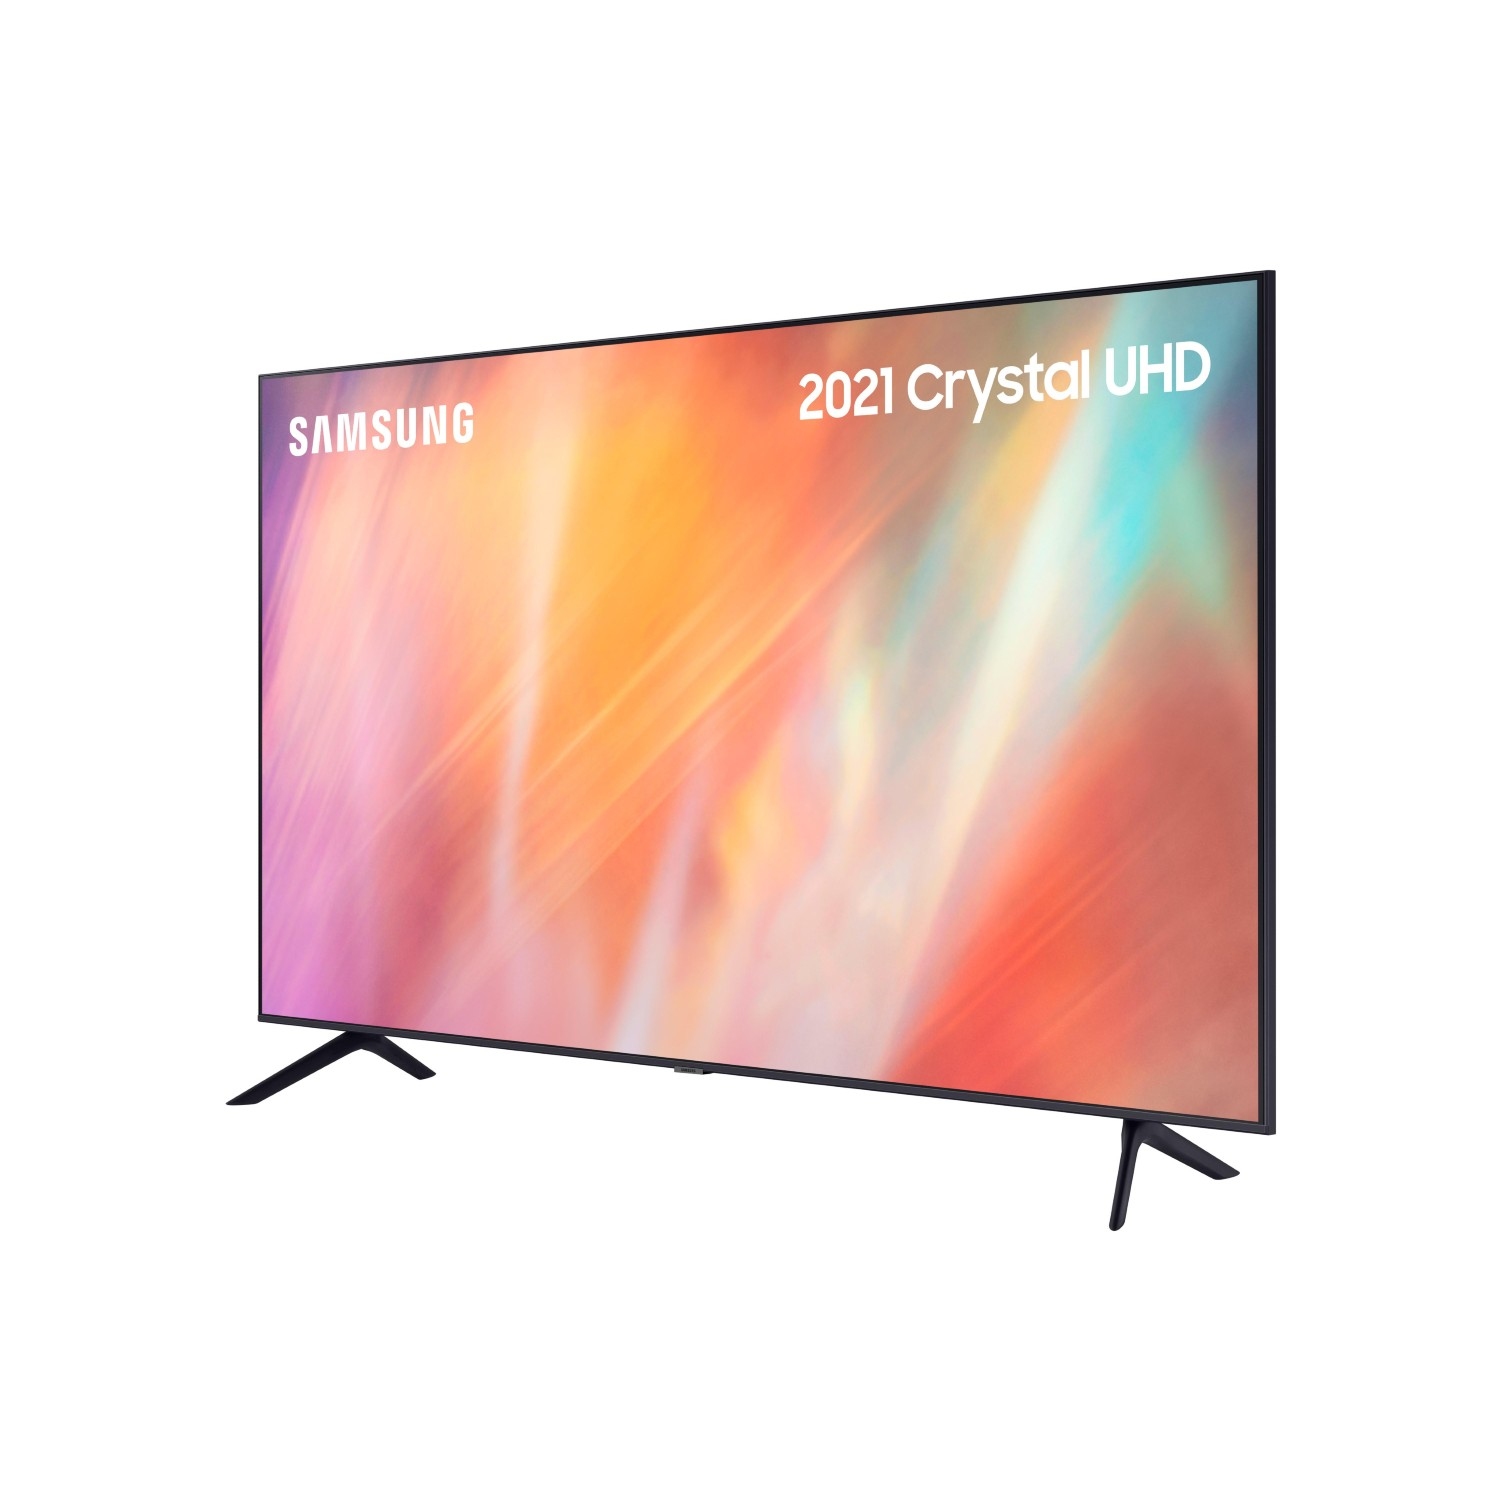 Samsung UE65AU7100KXXU 65" 4K UHD HDR Smart TV HDR powered by HDR10+ with Adaptive Sound and Boundless Screen - 7